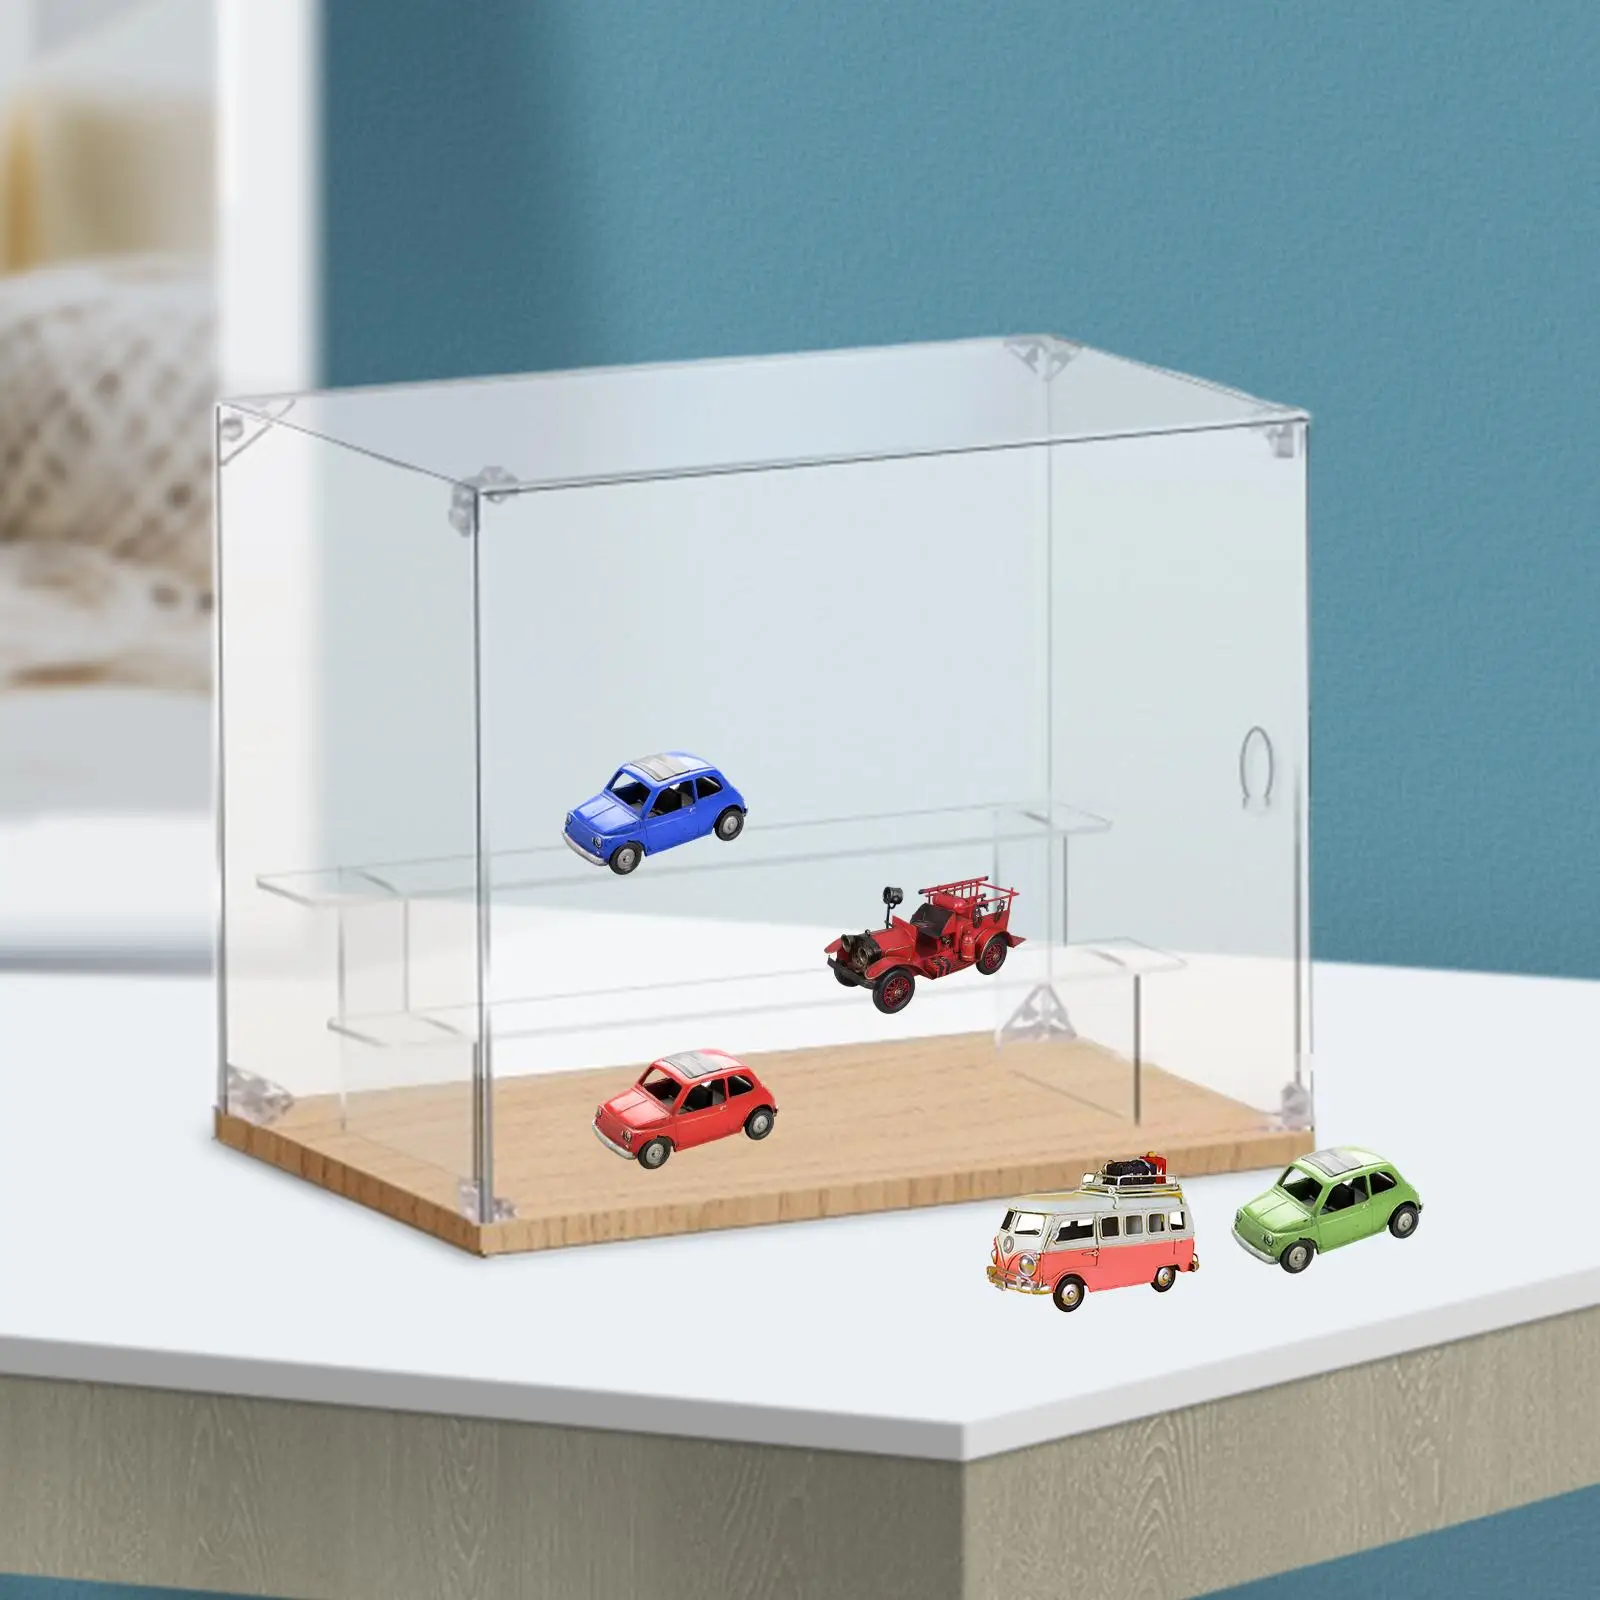 Transparent Acrylic Display Case for Collectibles Ladder Rack for Retail